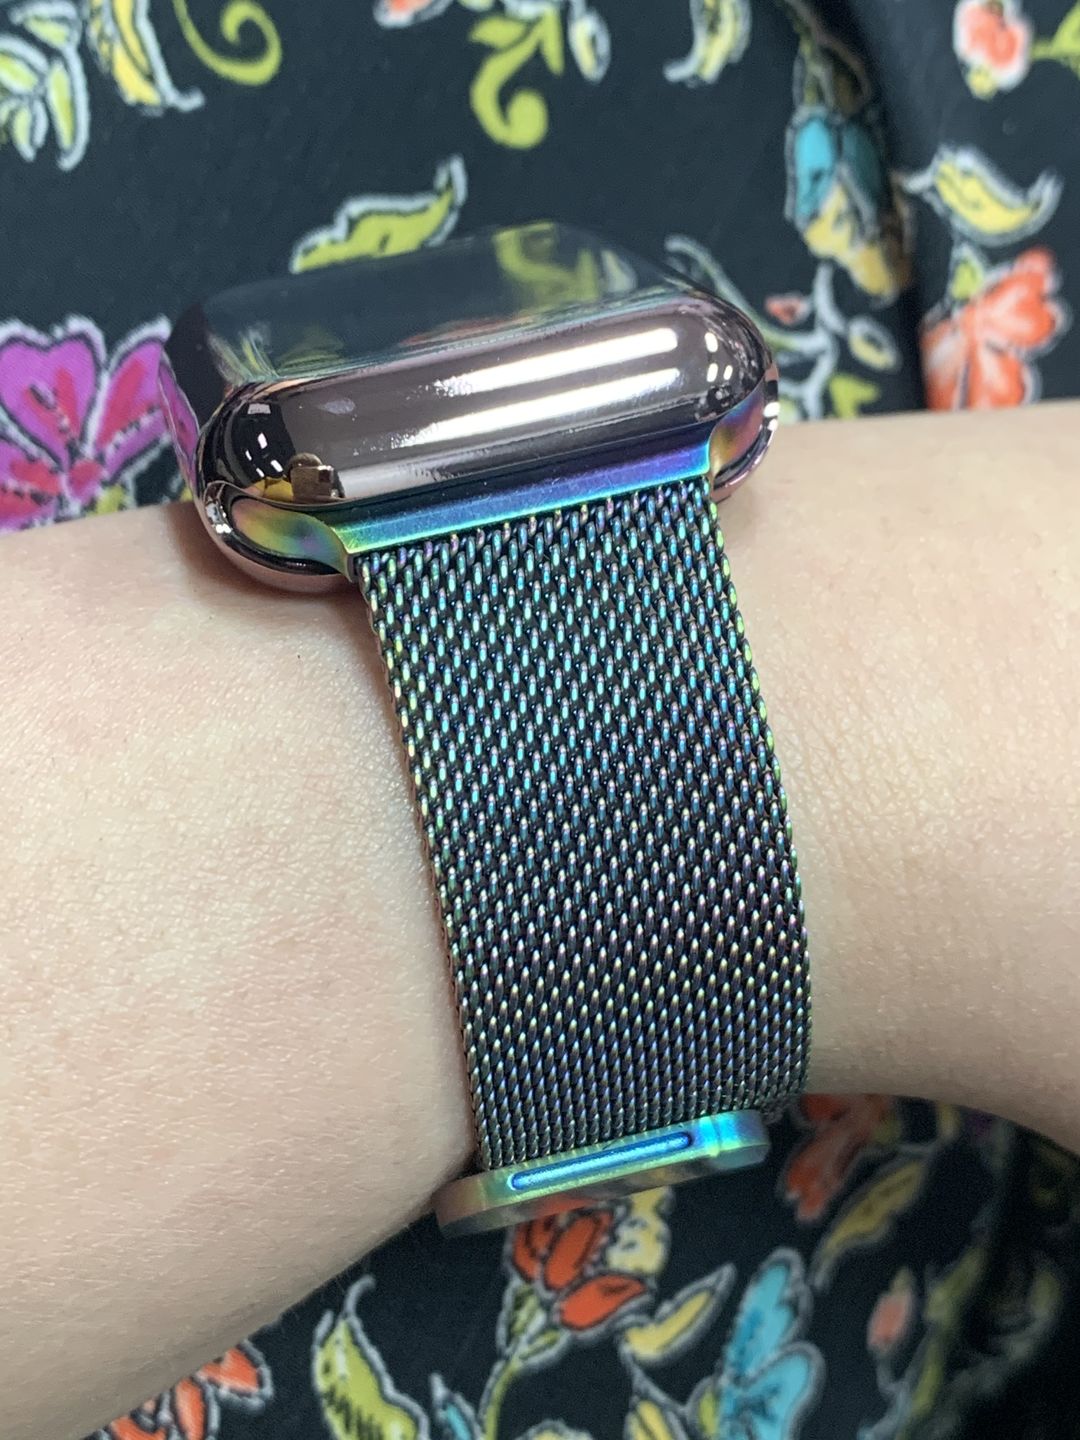 What is it about the Milanese Loop Straps